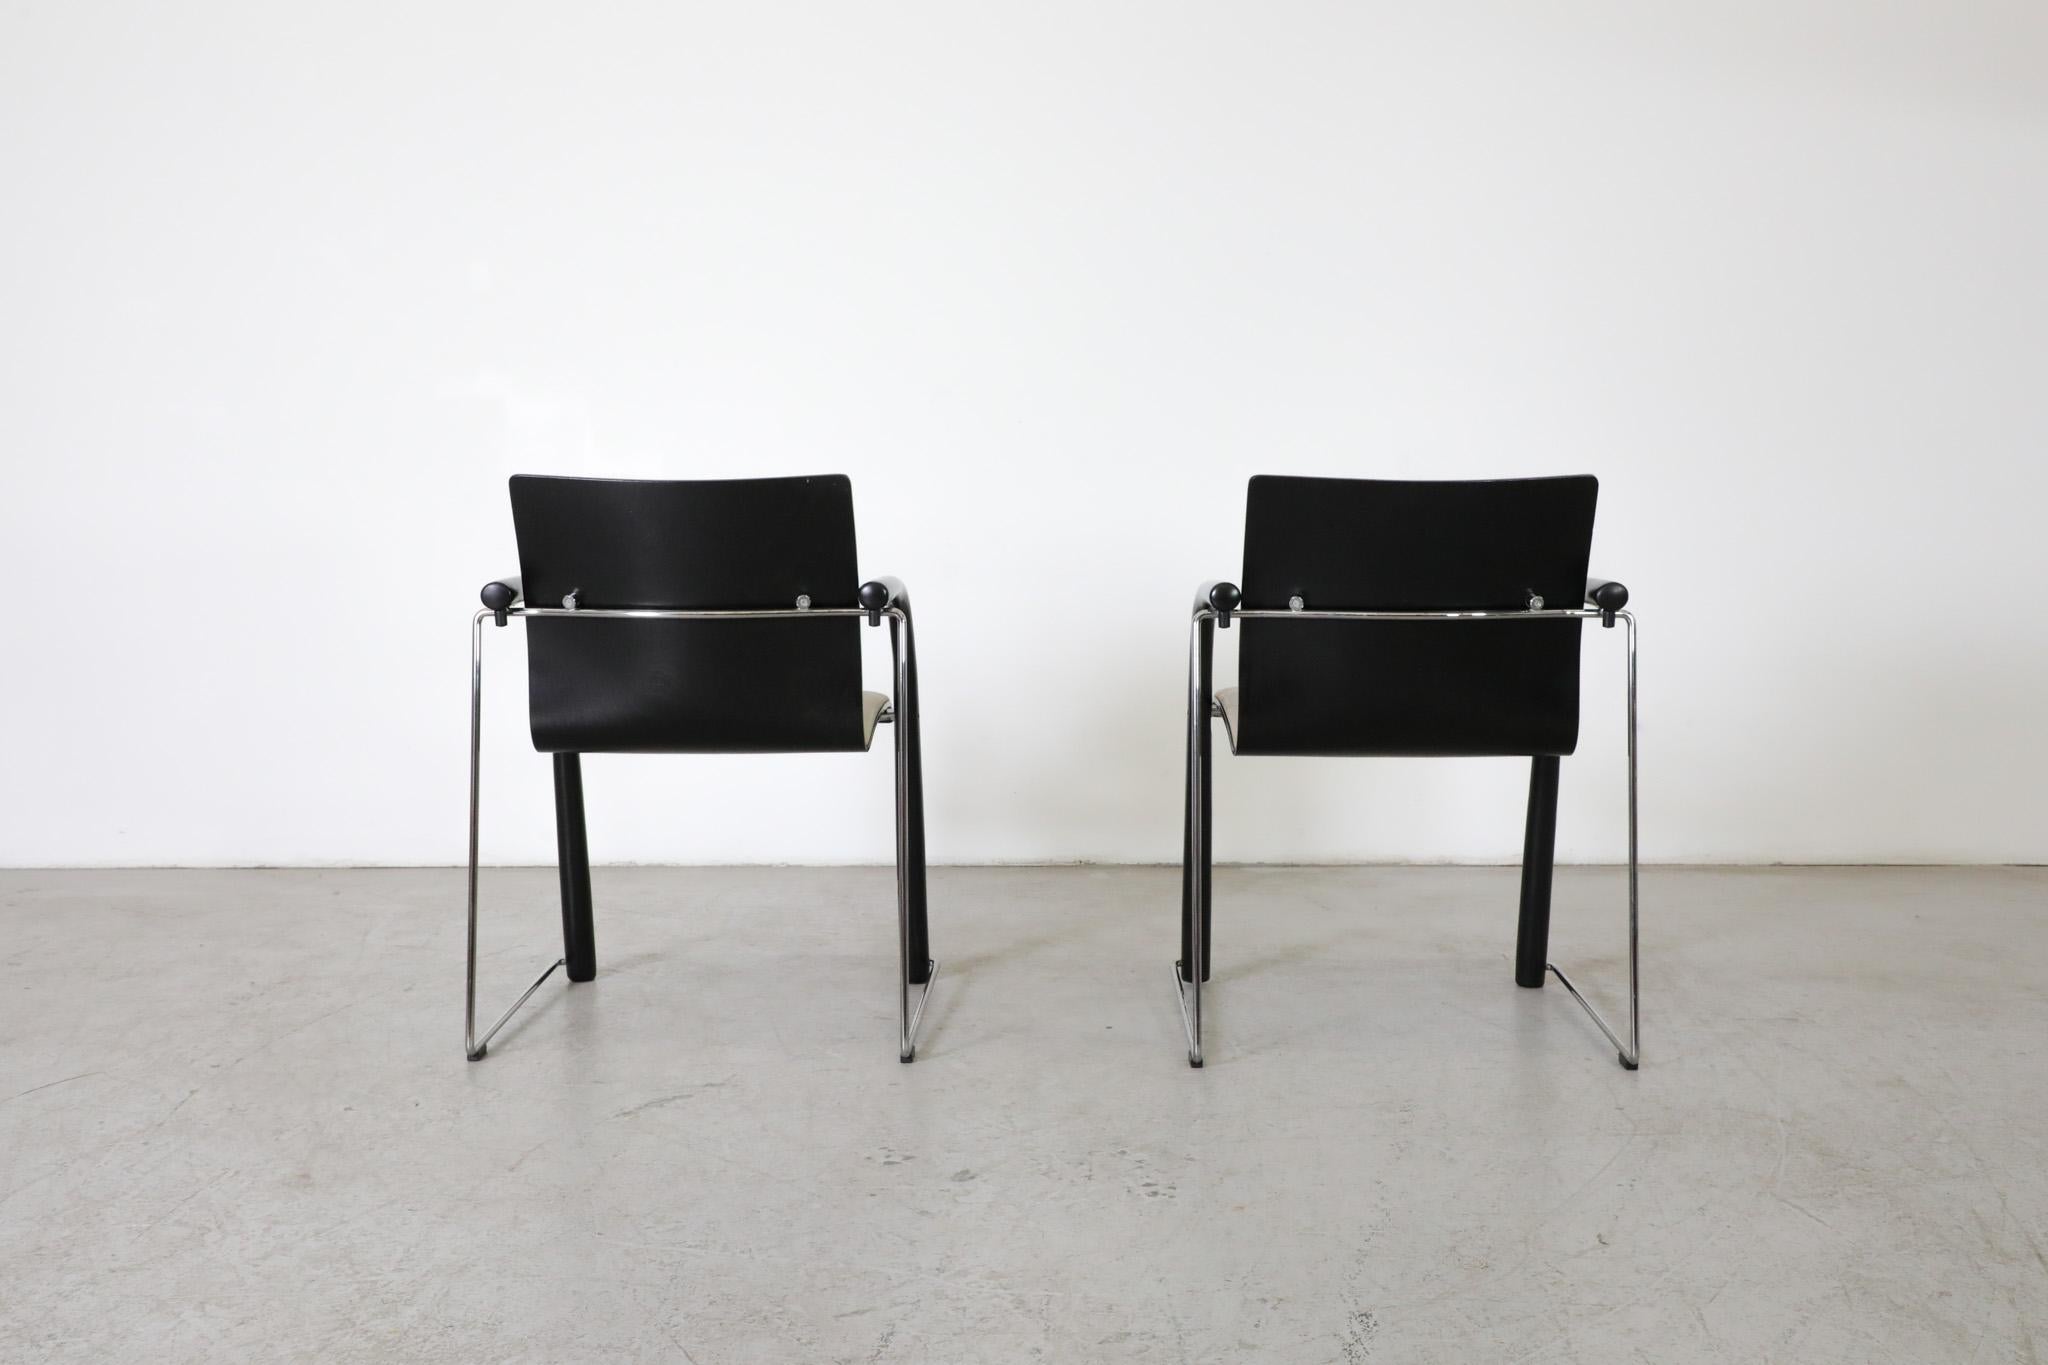 Austrian Pair of Thonet S320 by Wulf Schneider & Ulrich Böhme Chairs w/ Black Curved Arms For Sale